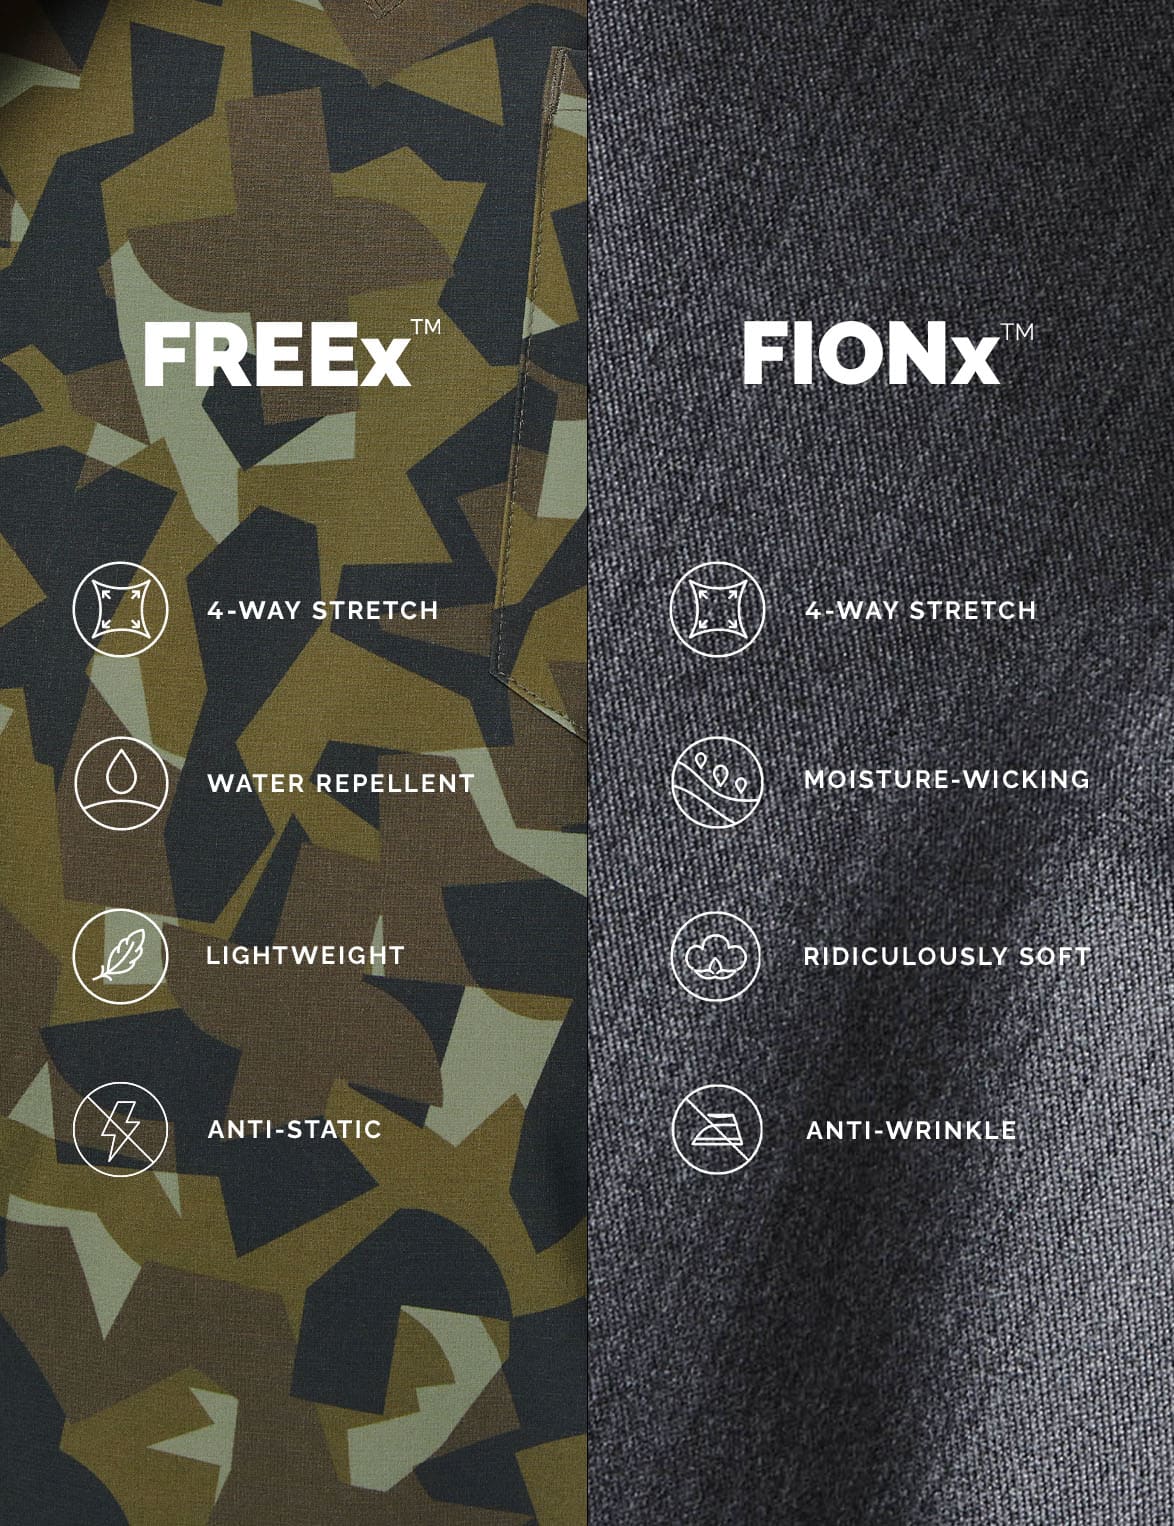 Made from recycled polyester fibers, our FREEx™ scrubwear fabrication is lightweight, anti-static (like pet hair) and water repellent with four-way stretch.